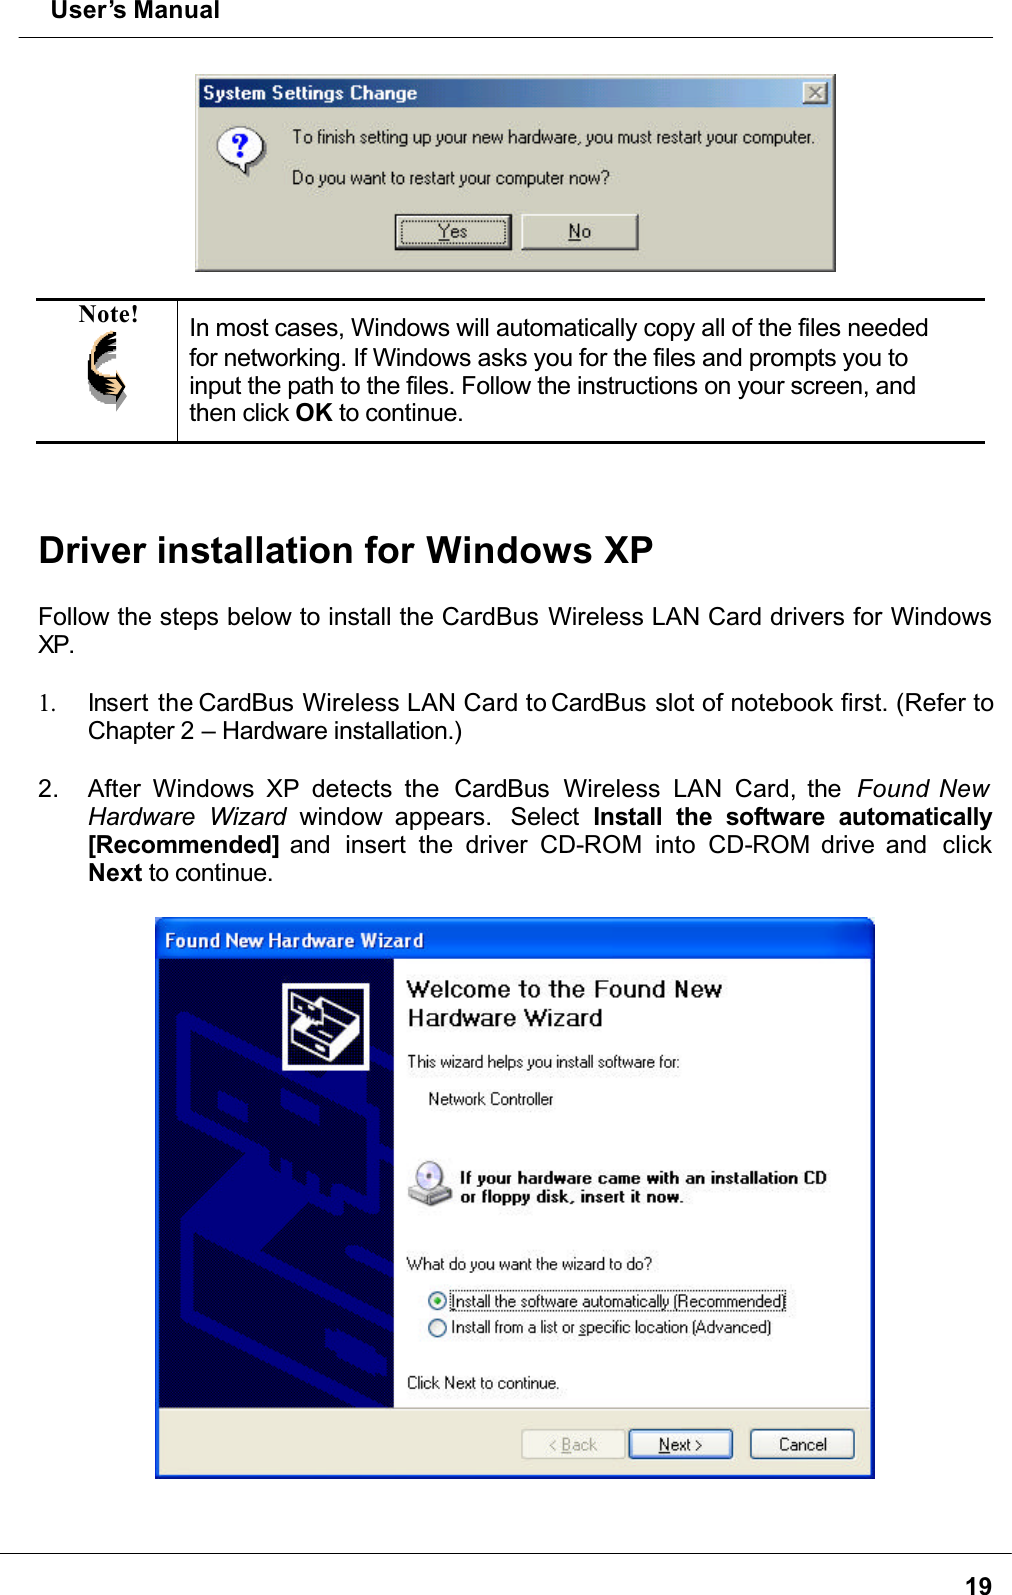  User’s Manual19Note! In most cases, Windows will automatically copy all of the files needed for networking. If Windows asks you for the files and prompts you to input the path to the files. Follow the instructions on your screen, and then click OK to continue.Driver installation for Windows XPFollow the steps below to install the CardBus Wireless LAN Card drivers for Windows XP.1. Insert the CardBus Wireless LAN Card to CardBus slot of notebook first. (Refer to Chapter 2 – Hardware installation.)2. After Windows XP detects the  CardBus  Wireless LAN Card, the  Found New Hardware Wizard window appears.  Select Install the software automatically[Recommended] and  insert the driver CD-ROM into CD-ROM drive and  clickNext to continue.